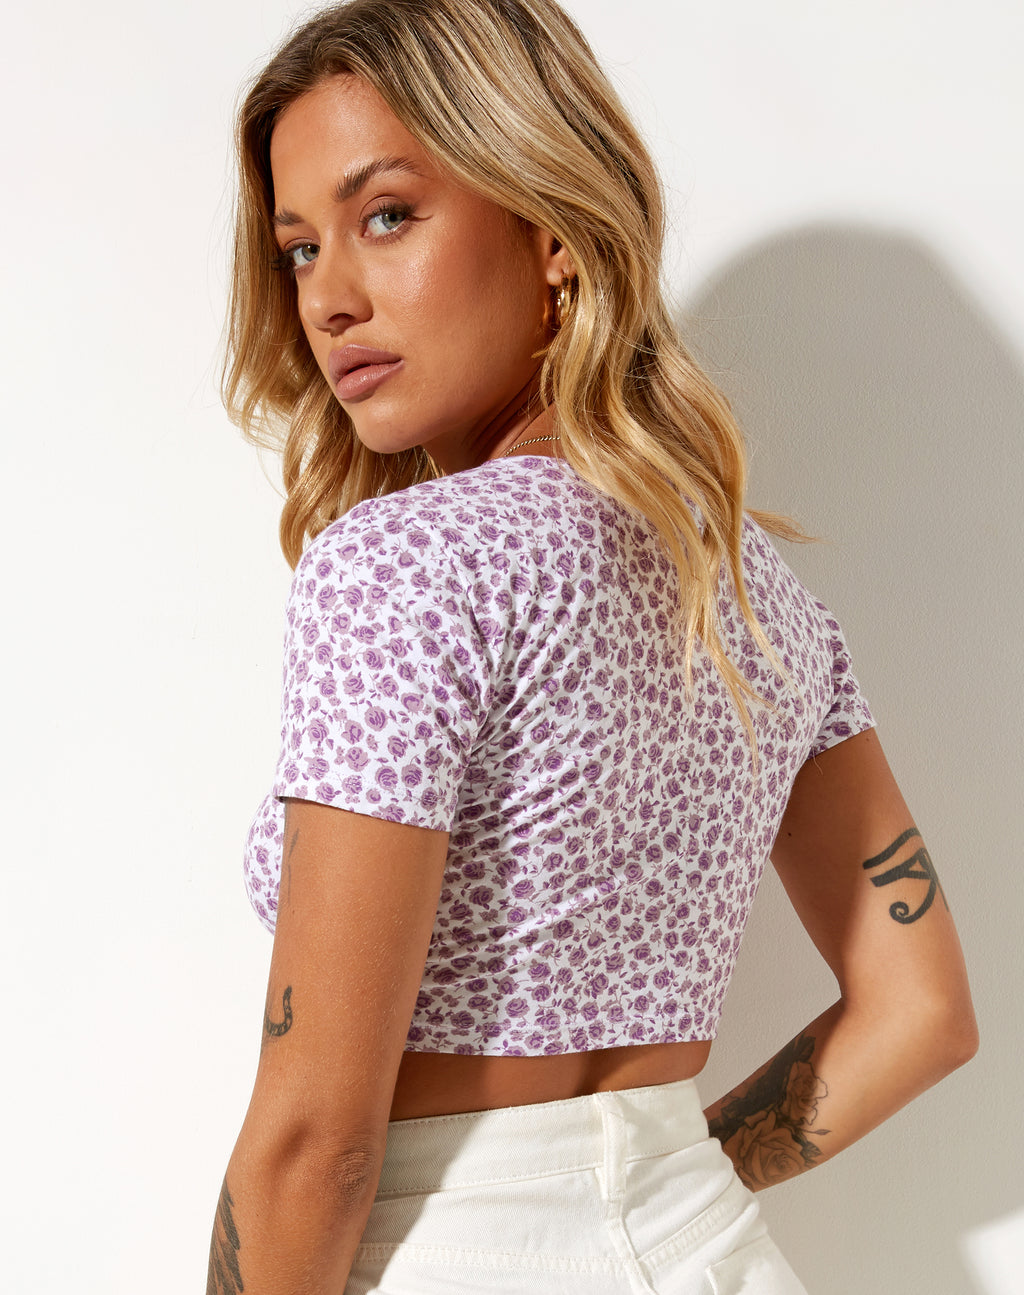 Mieye Crop Top in Ditsy Rose Lilac